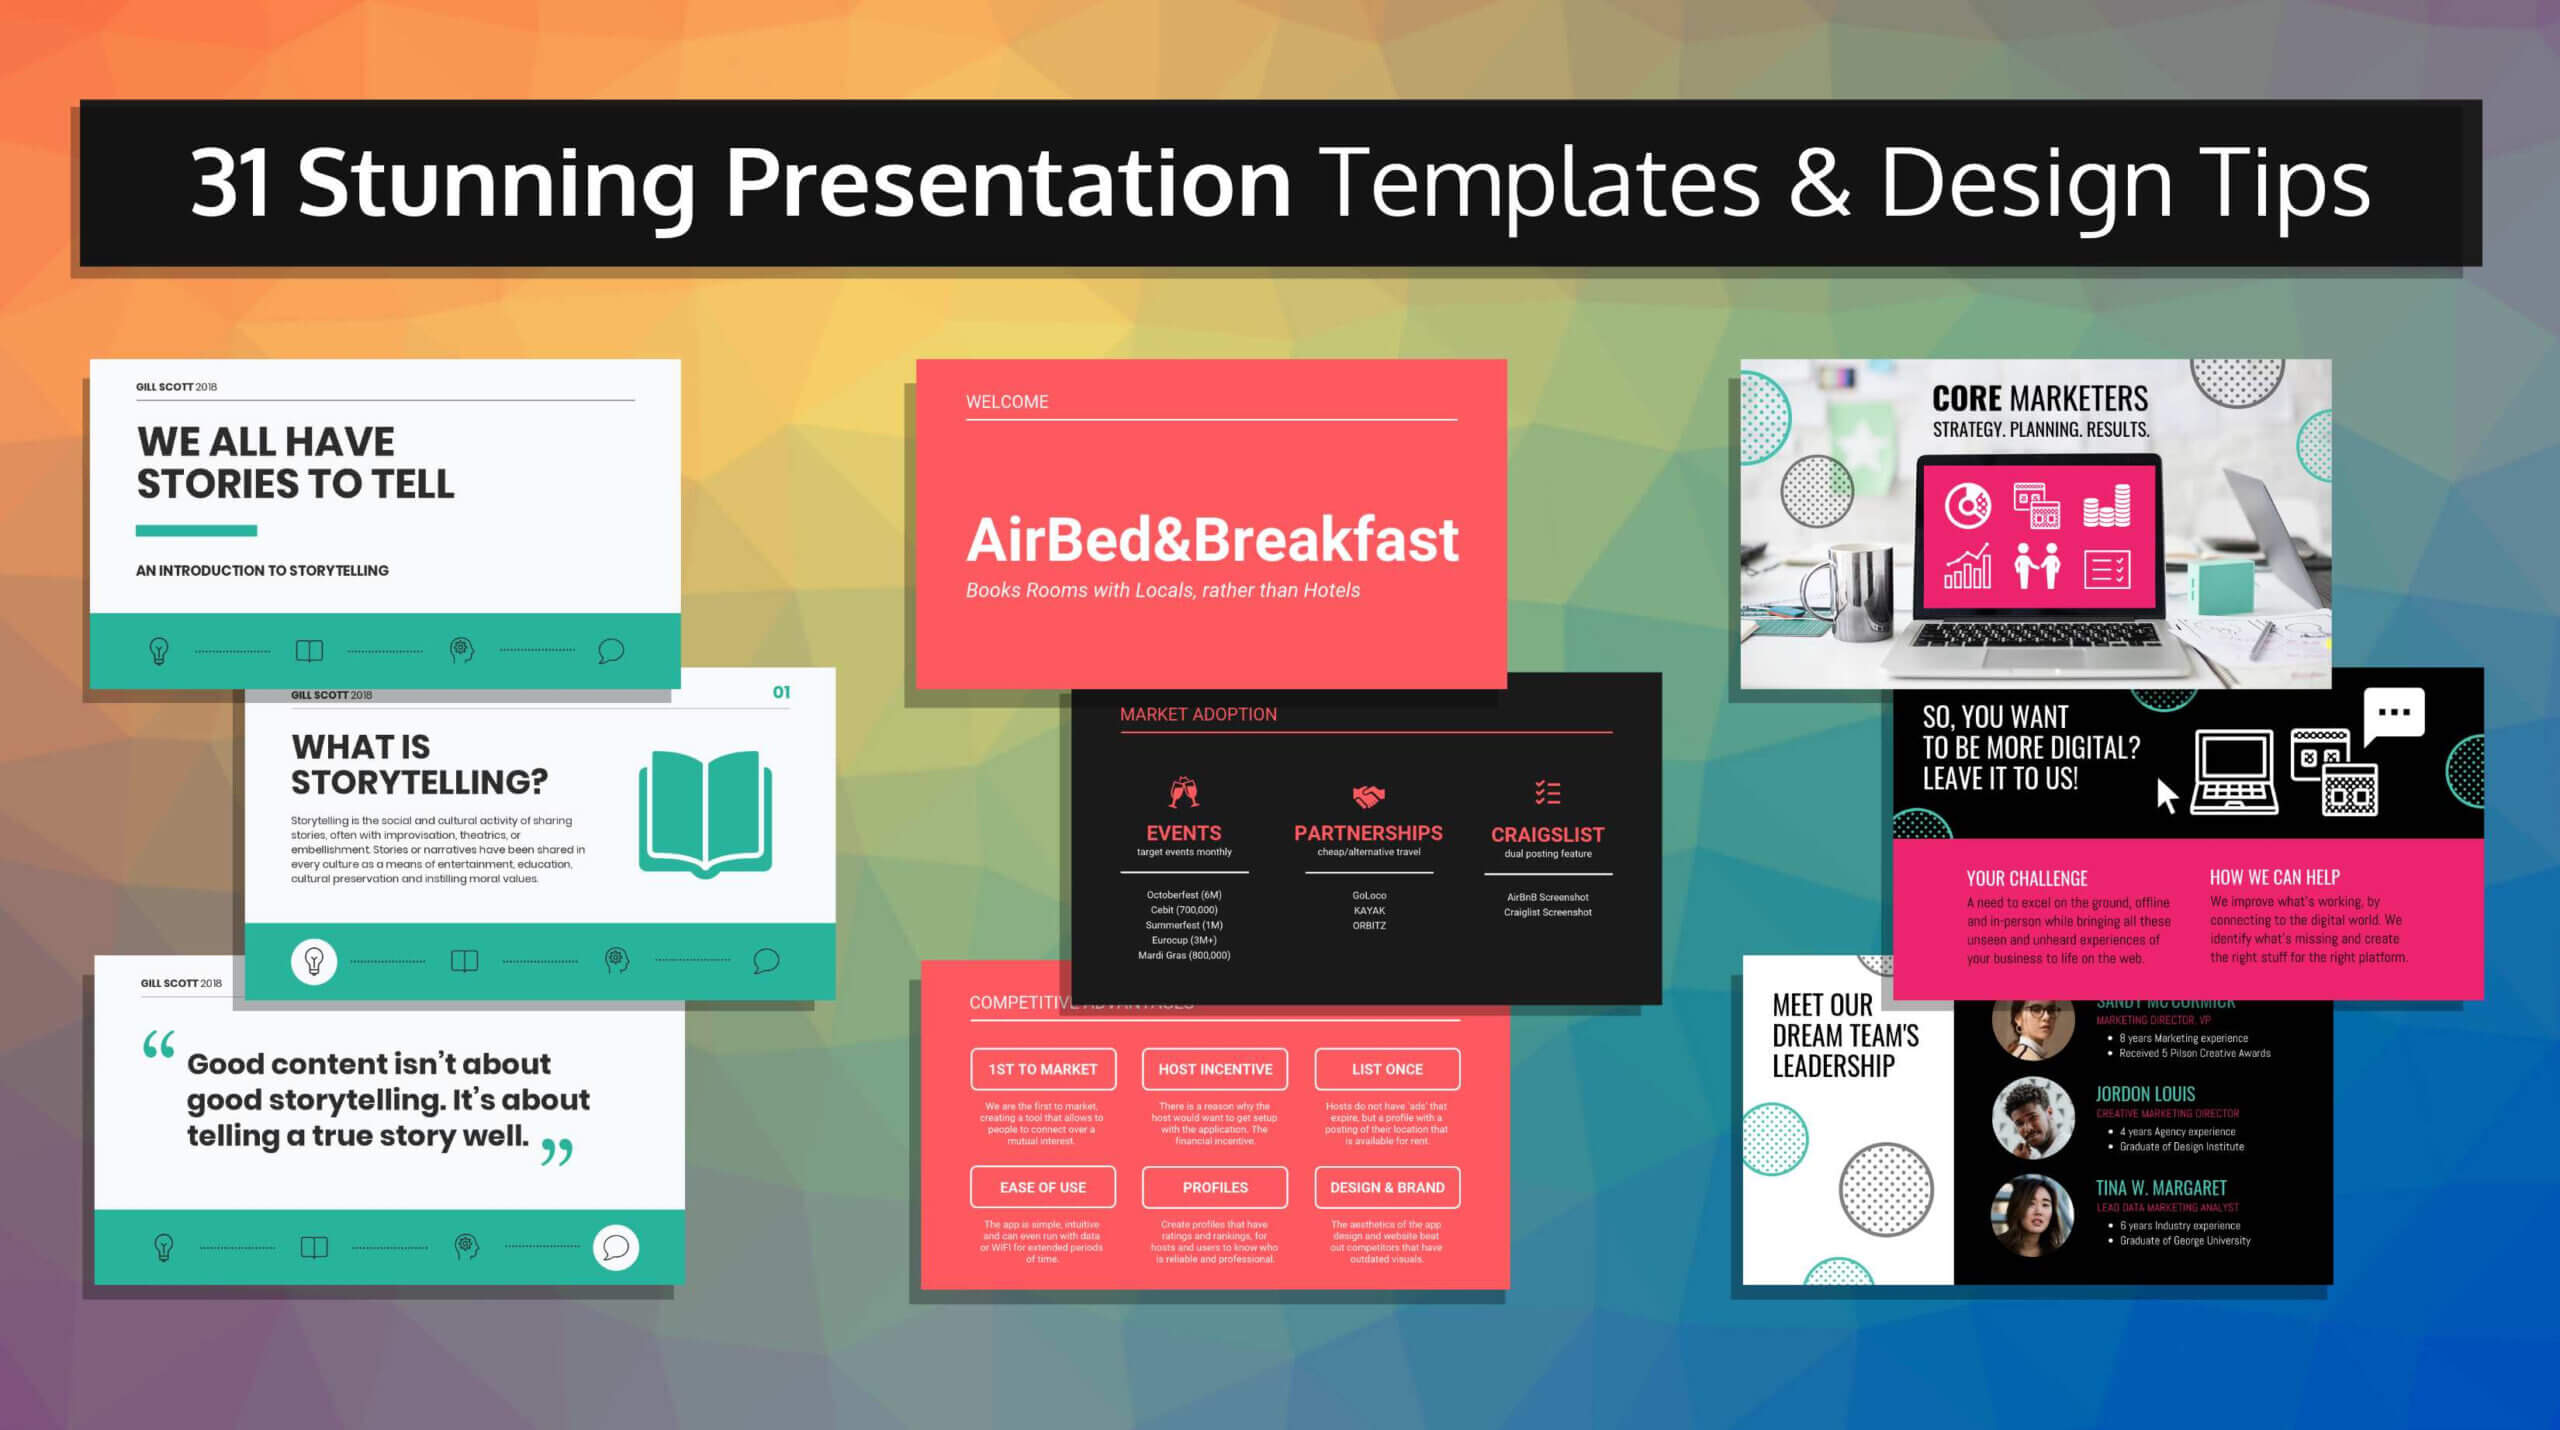 33 Stunning Presentation Templates And Design Tips For Powerpoint Templates For Communication Presentation